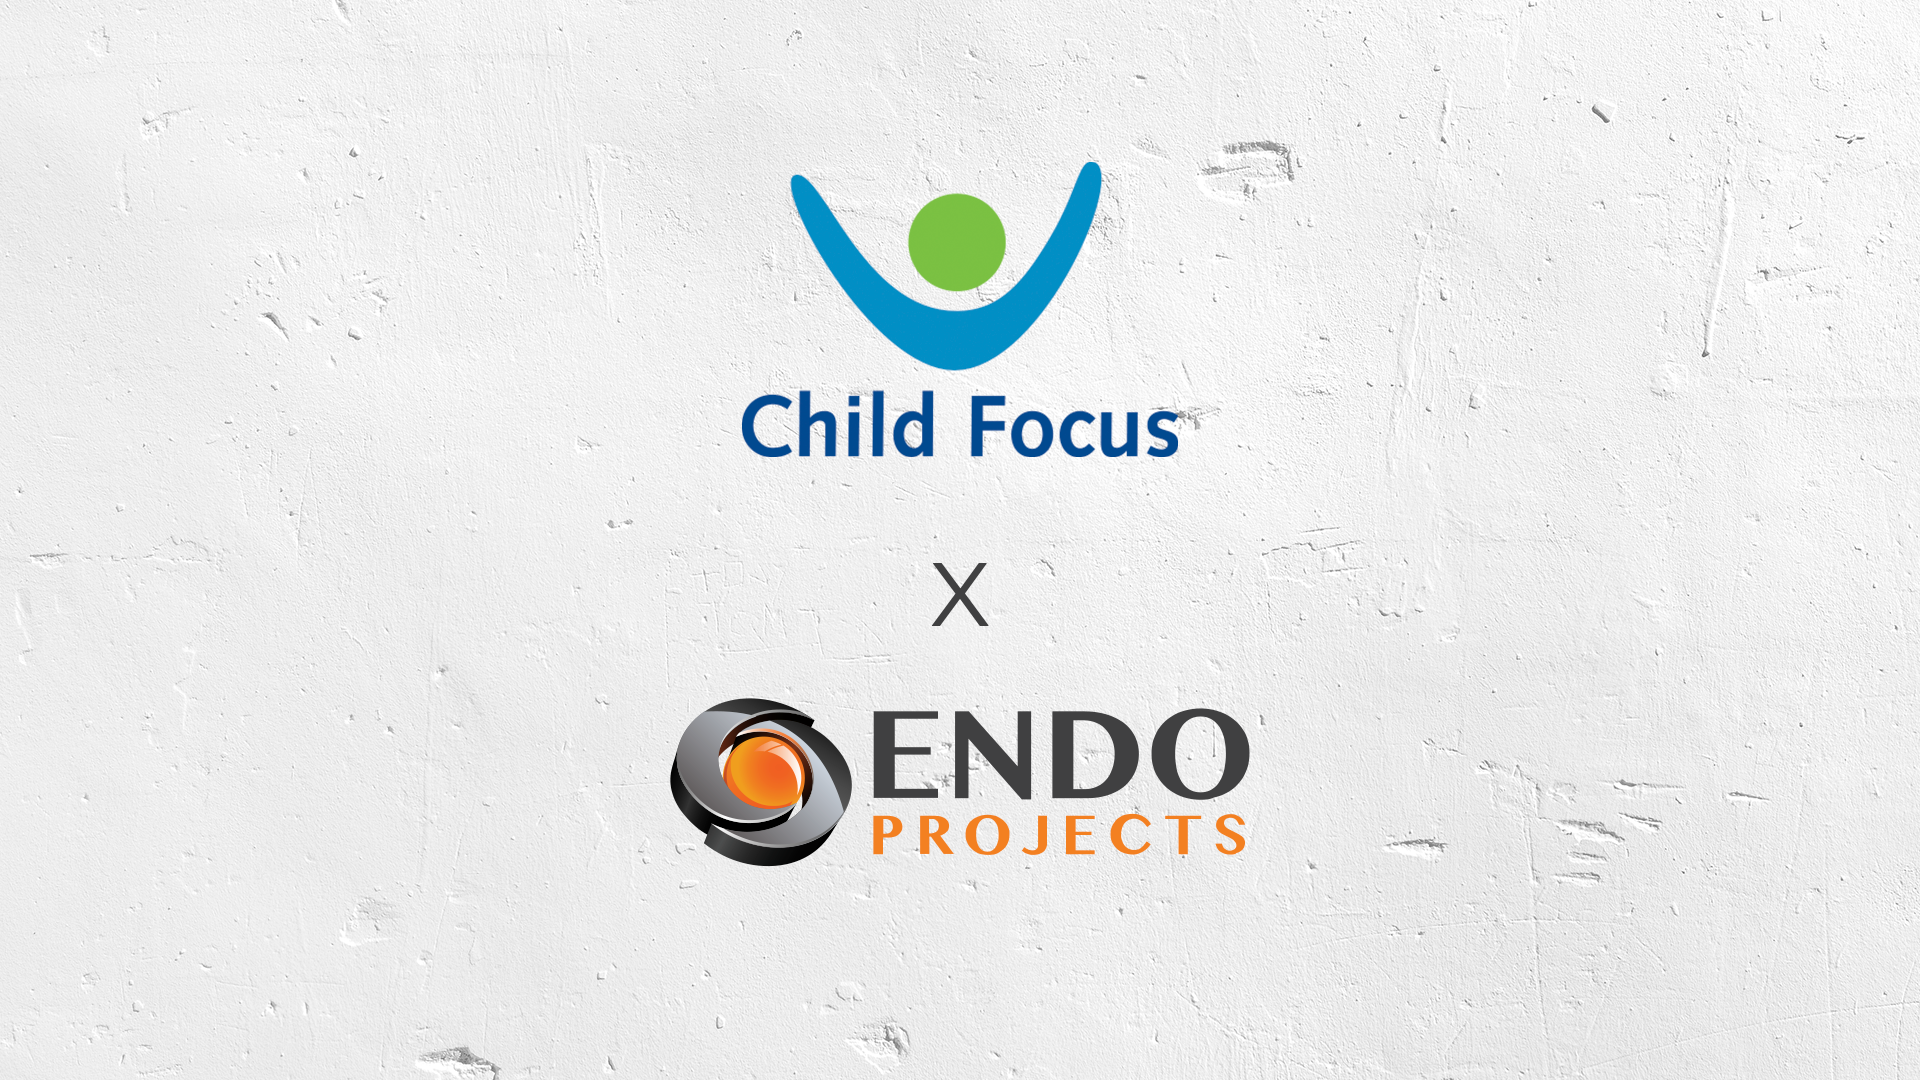 Endo Projects x Child Focus